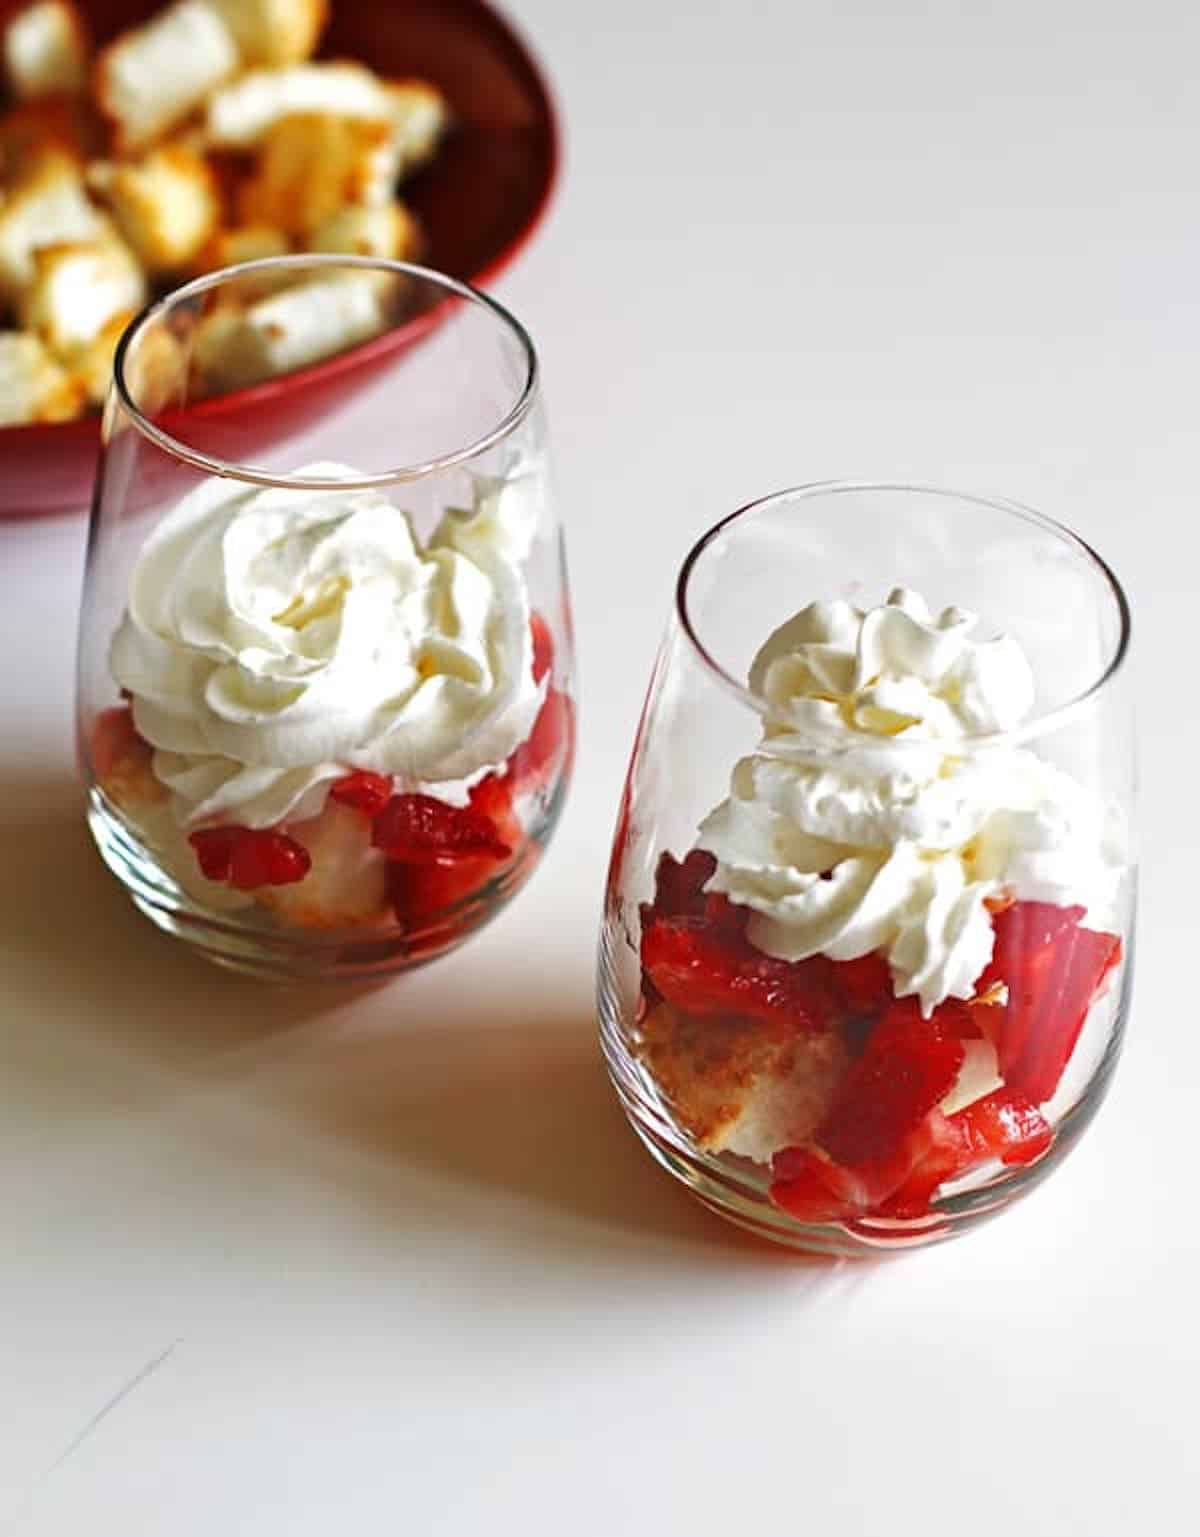 Toasted angel food cake cubes topped with strawberries and whipped cream in a wine glasses to assemble strawberry shortcakes.